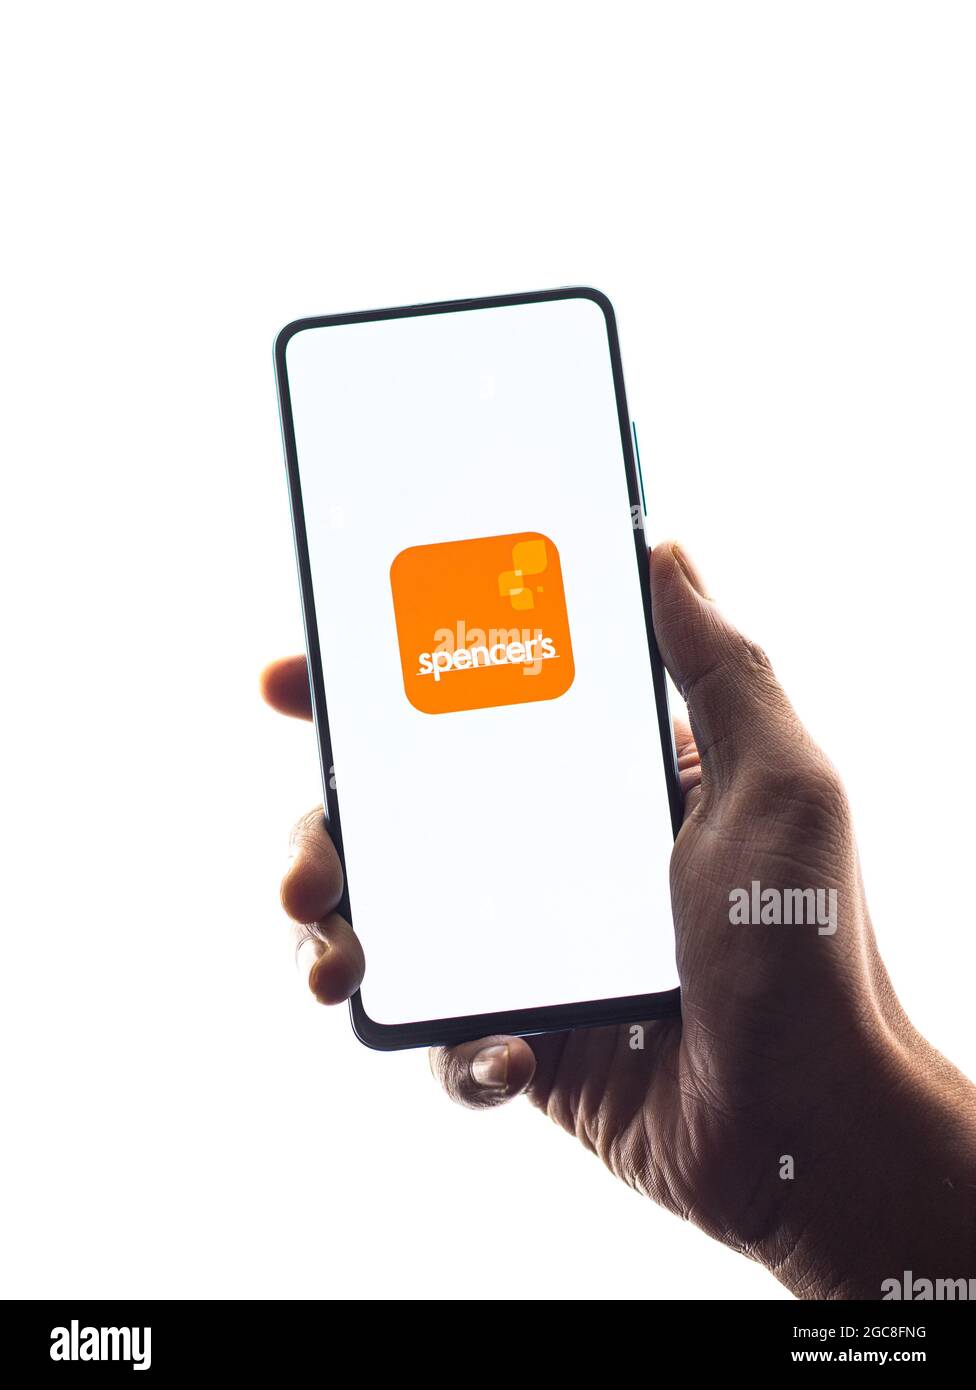 Assam, India - August 6, 2021 : Spencer's Retail logo on phone screen stock image. Stock Photo